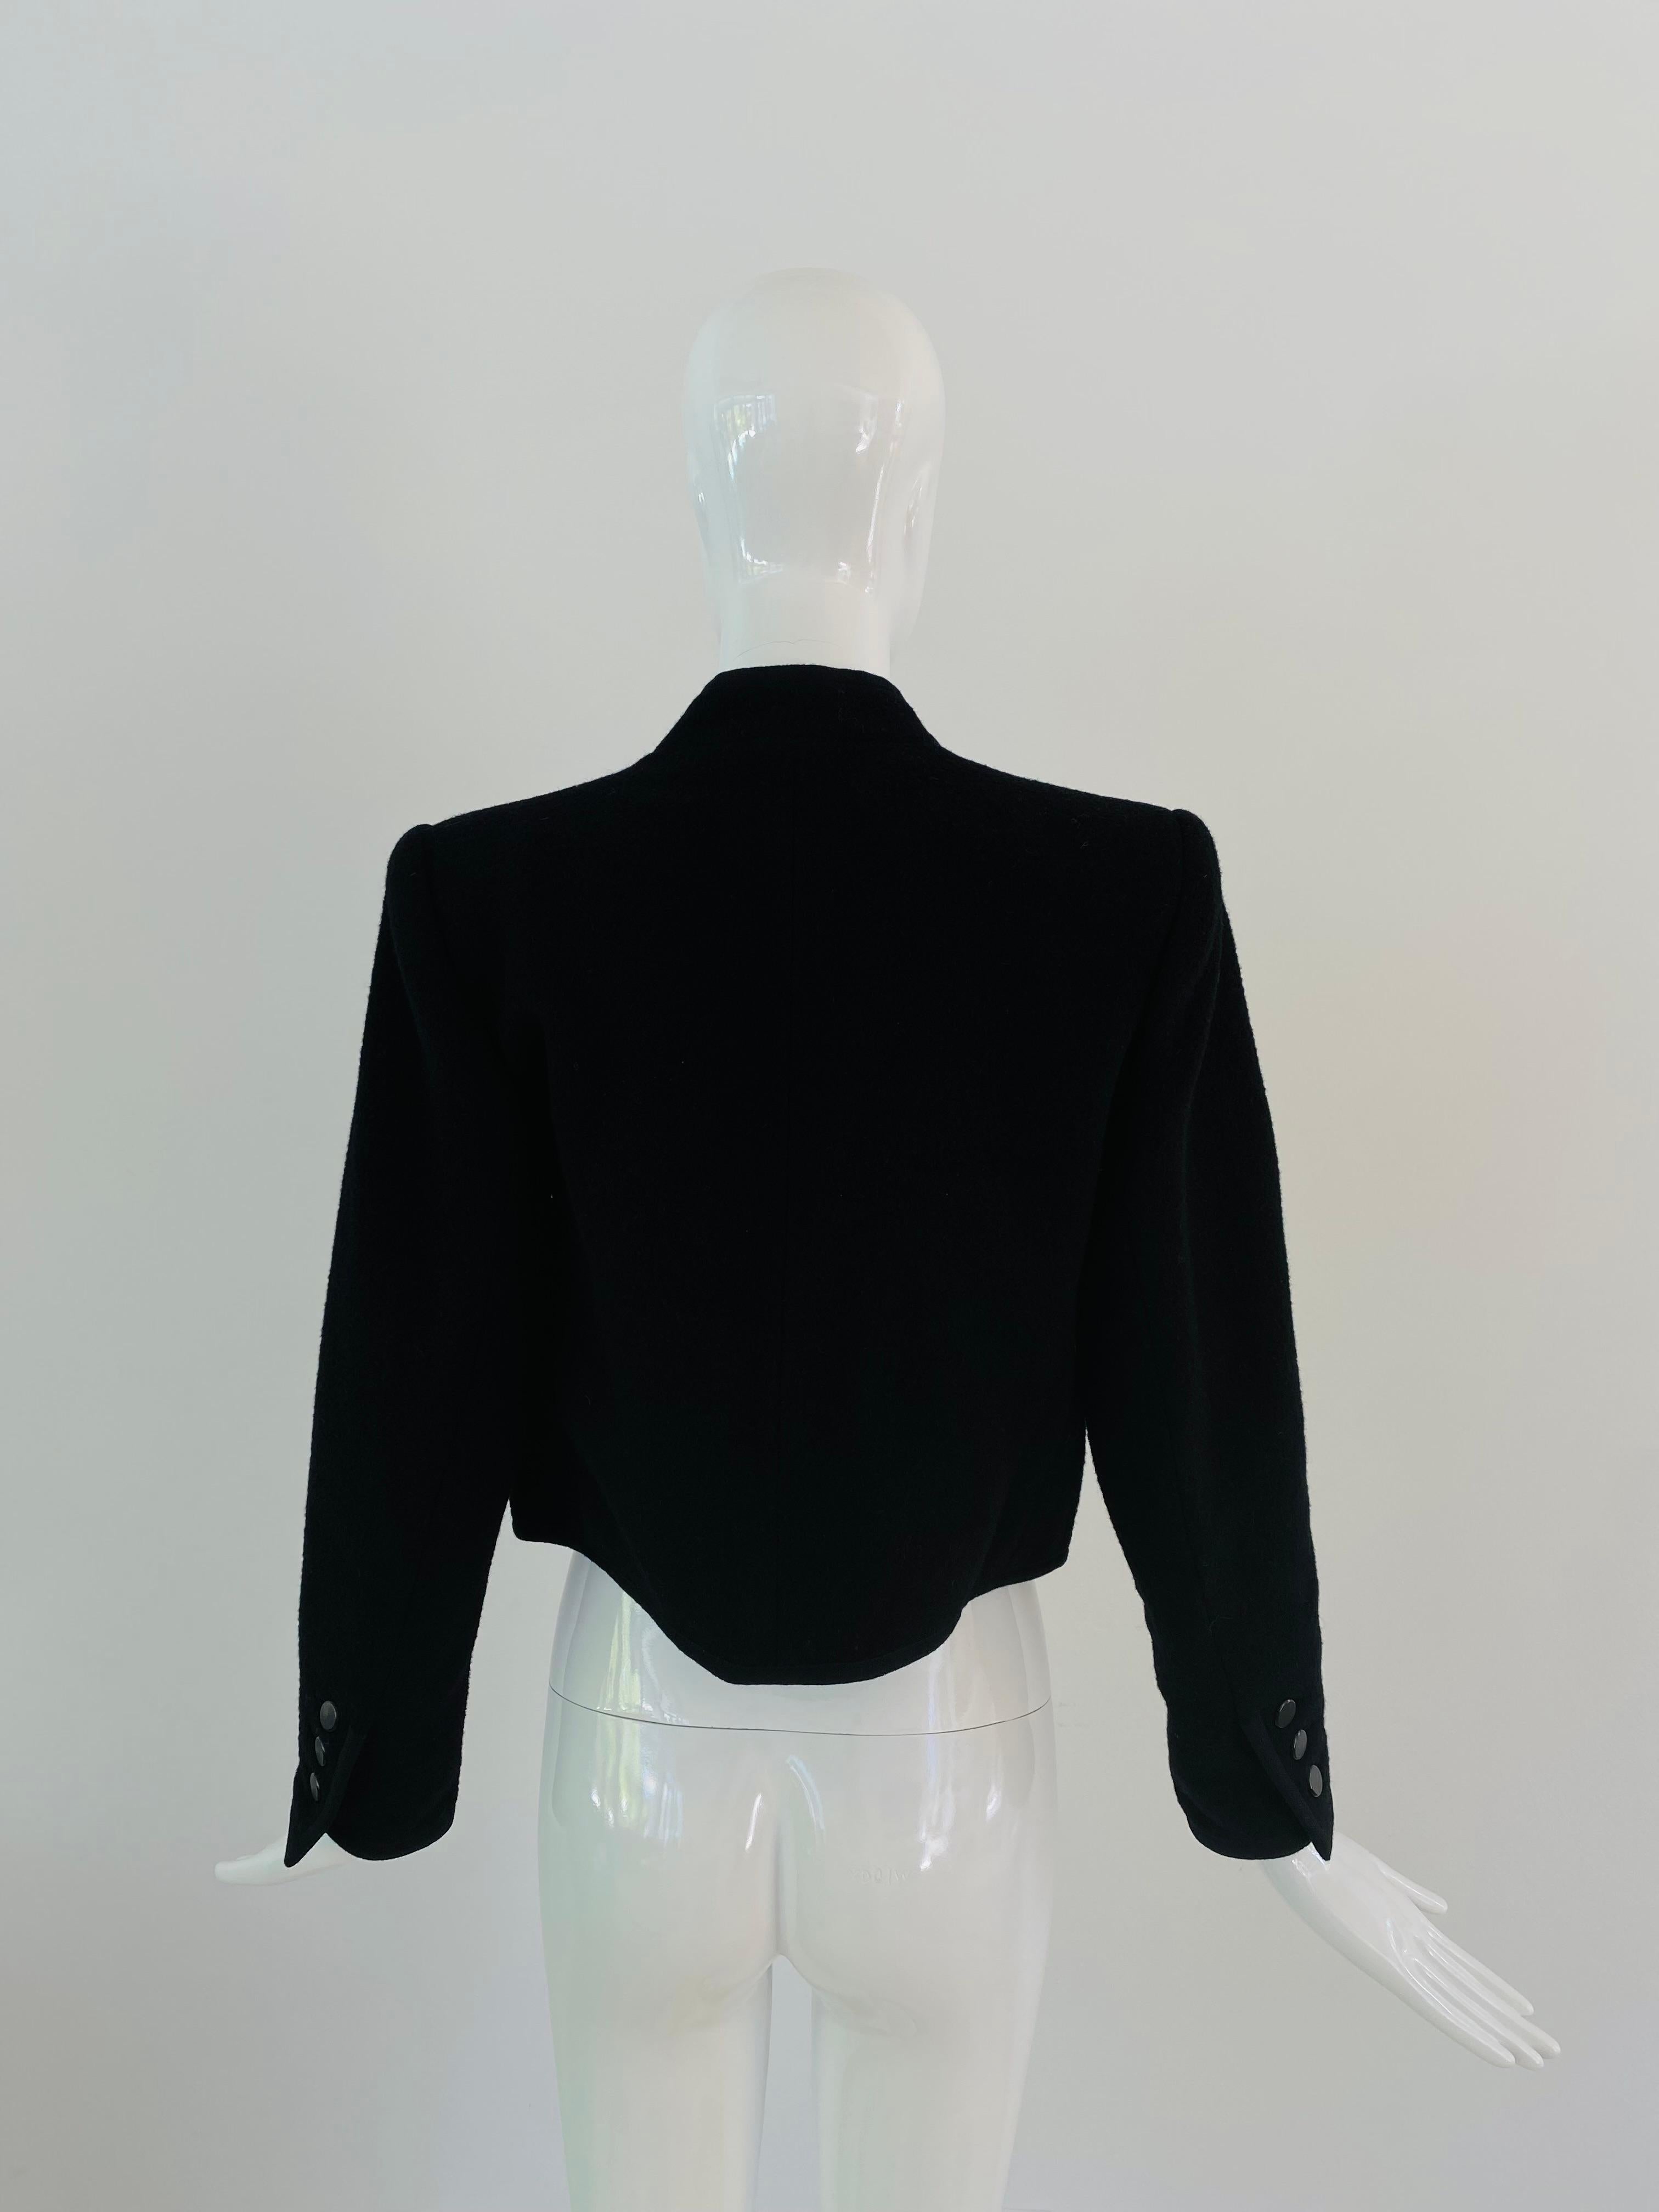 1970s Saint Laurent Rive Gauche black bolero style wool jacket bought from Dayton's Oval Room, the posh third floor of a high end Minneapolis department store that is no longer in business . This looks to be from the 1976 Russian collection. Crafted